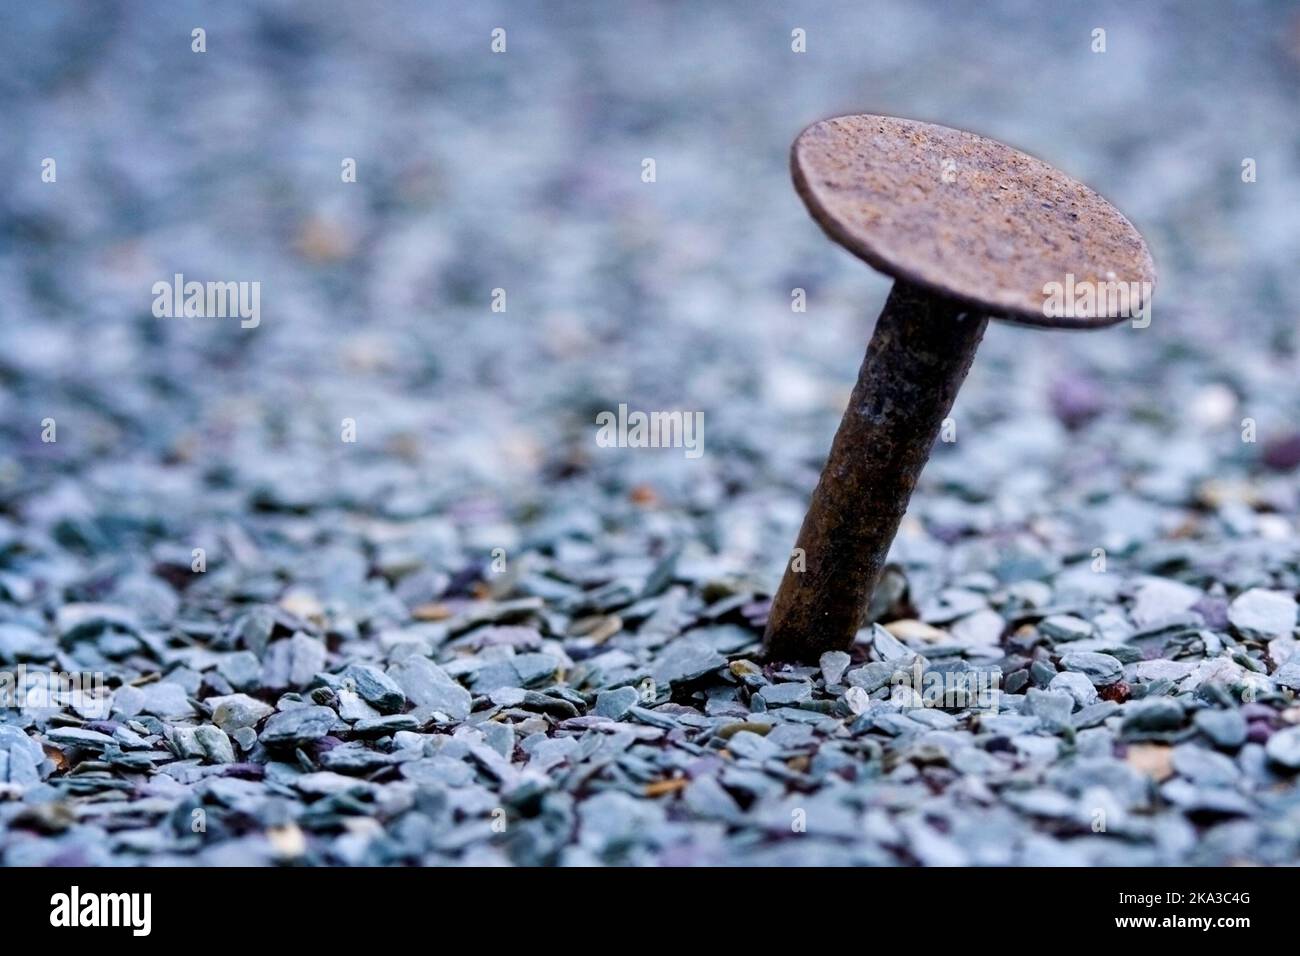 Flat headed felt roofing nail with visible shaft, nail or tack is at an angle. Bluish tone to small chippings on roofing felt surface, soft background Stock Photo